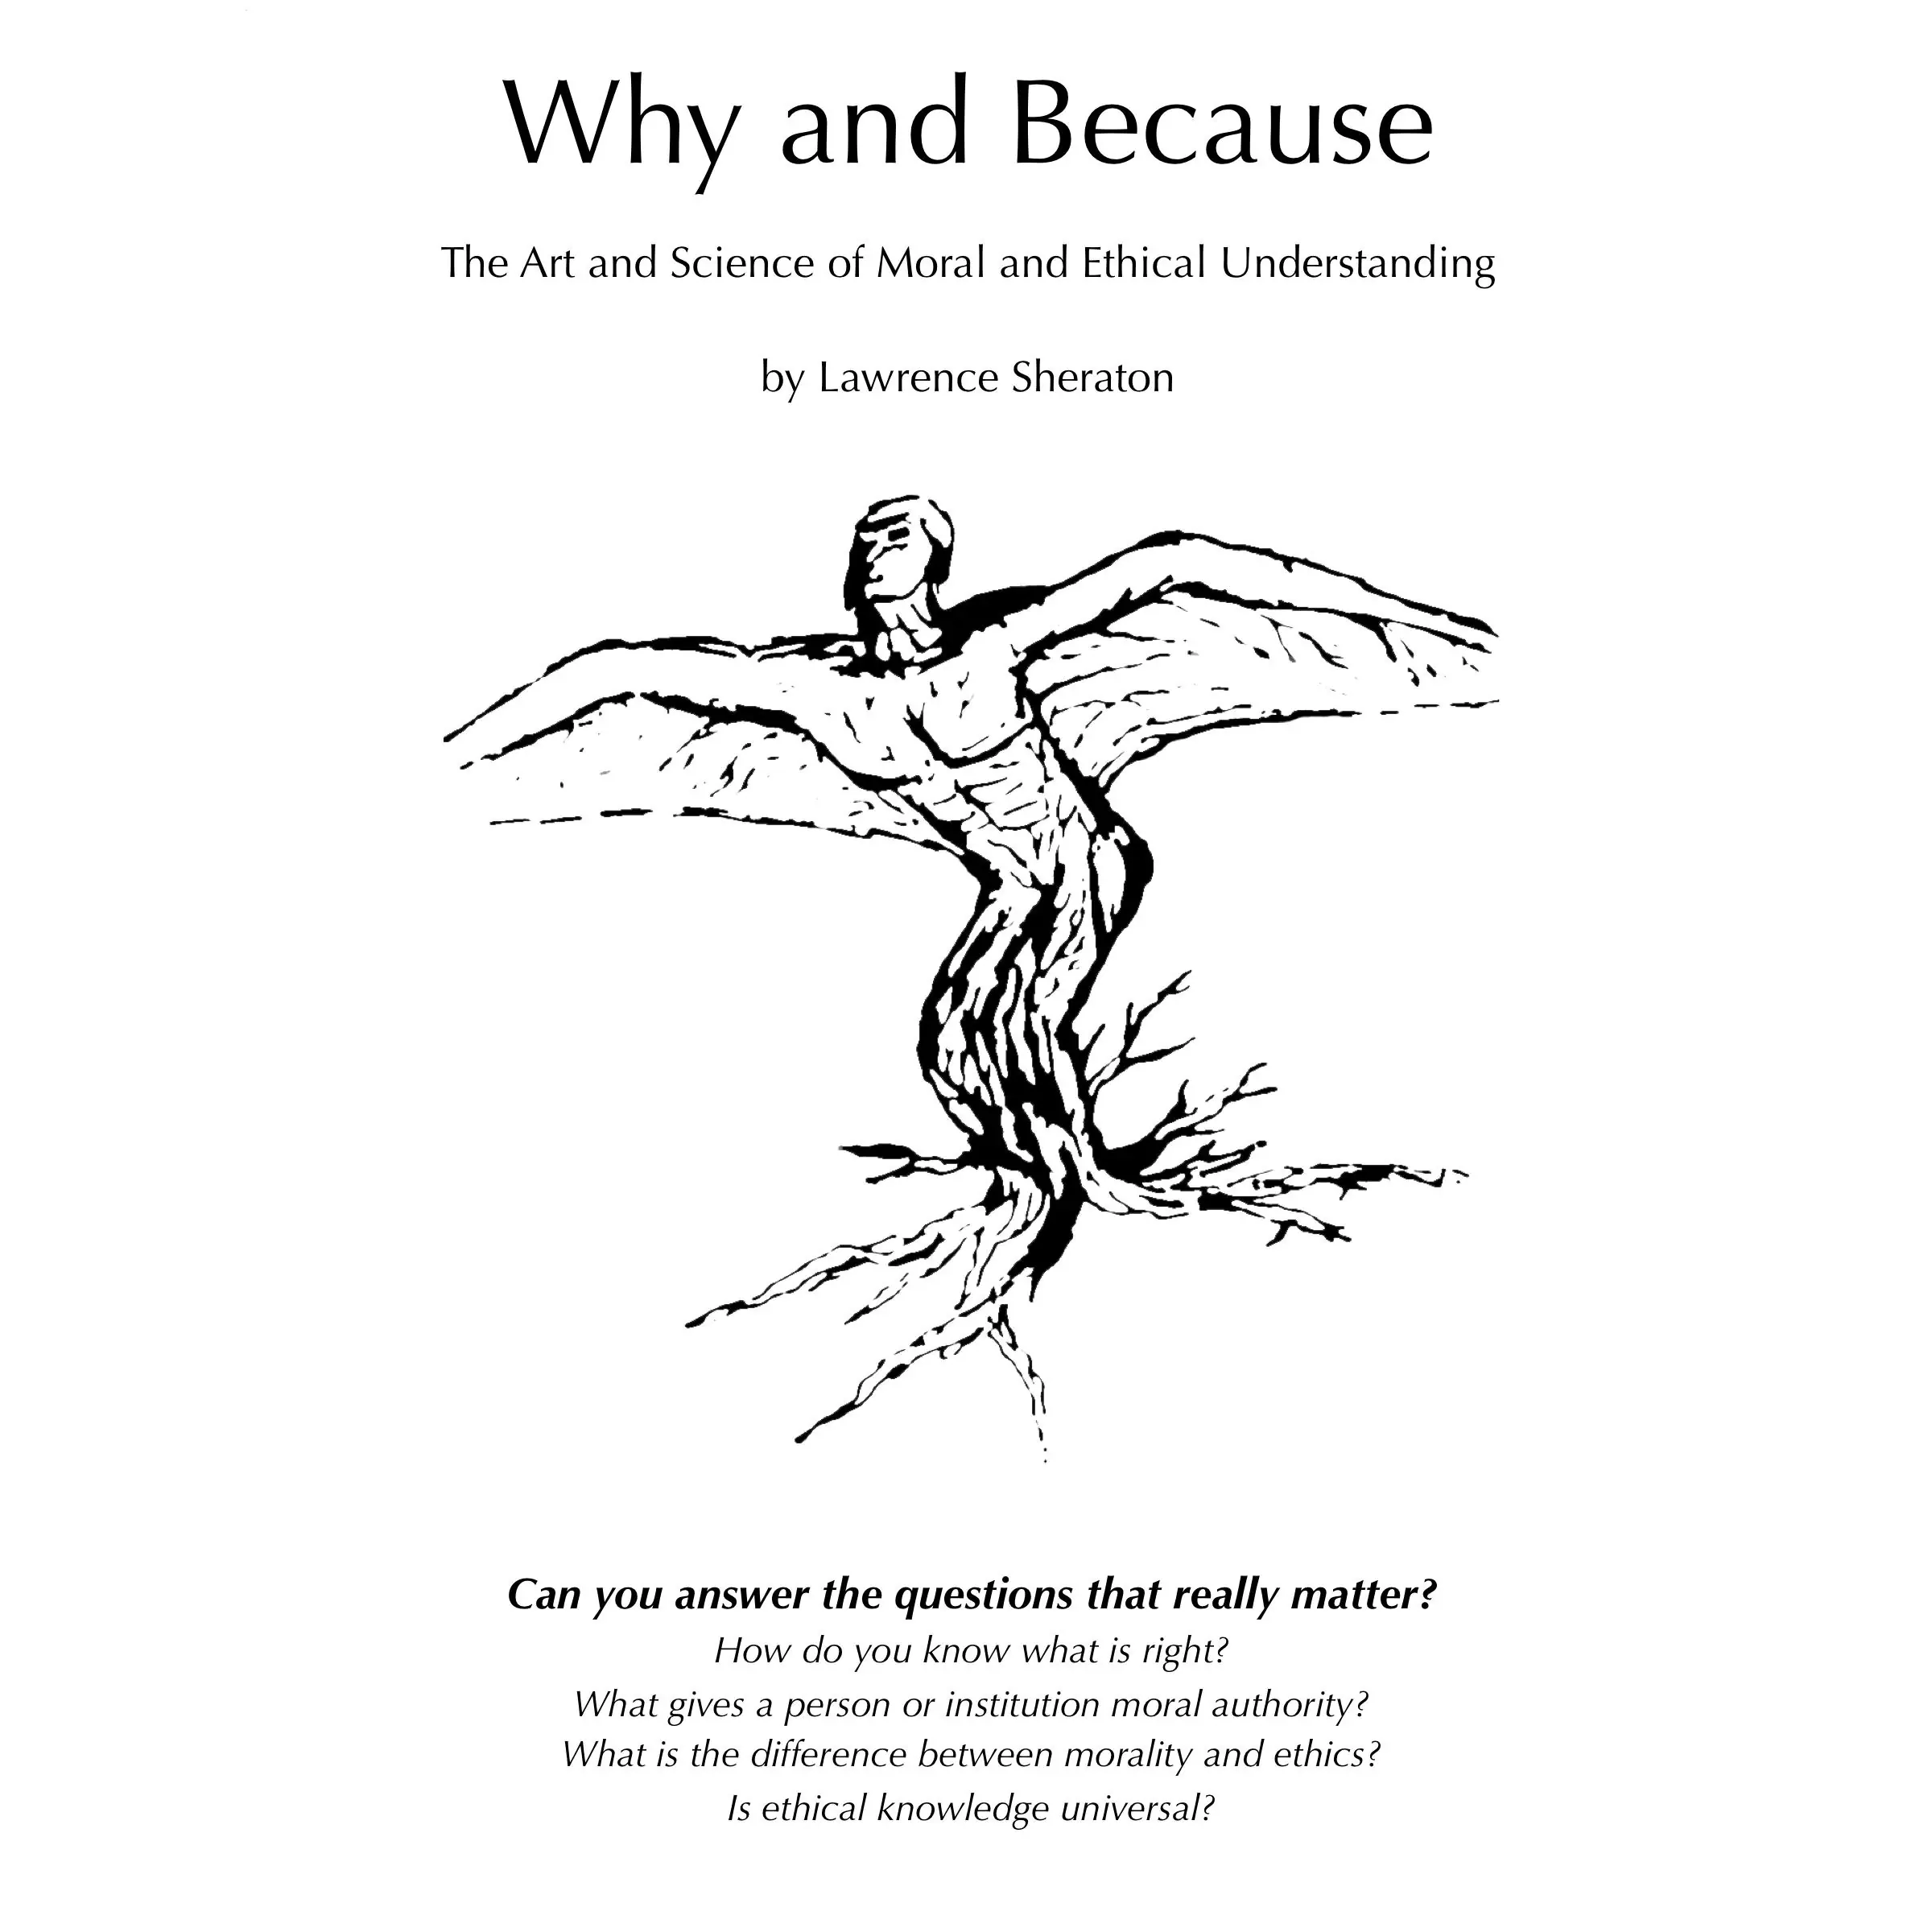 Why and Because - The Art and Science of Moral and Ethical Understanding by Lawrence Sheraton Audiobook